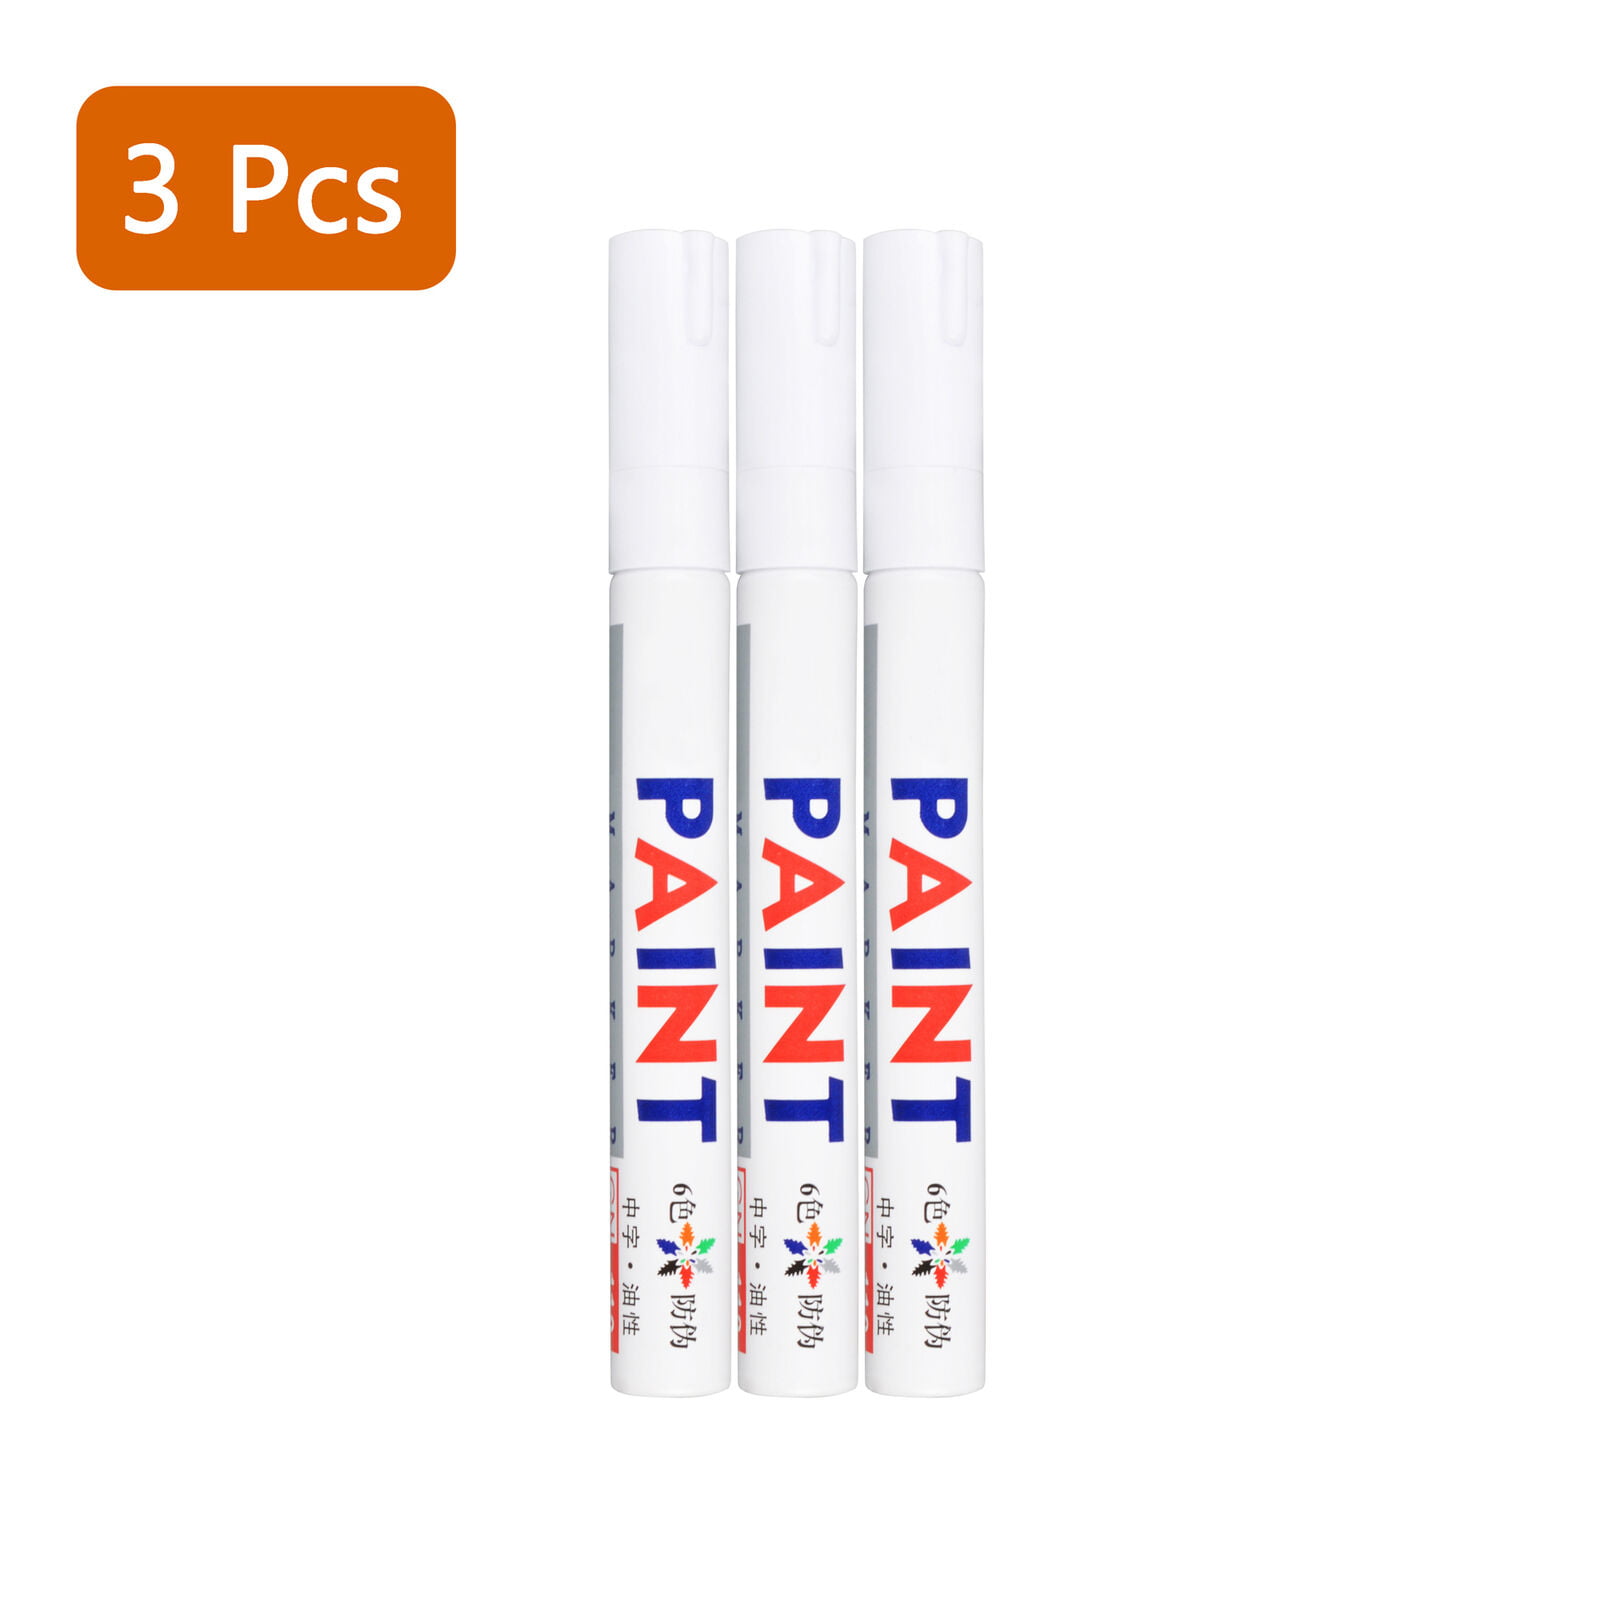 2 Silver Permanent Marker Pens for Wood Rock Plastic Leather Glass Stone Metal Canvas Ceramic Marker Extra Very Fine Point Opaque Ink 0.7mm Acrylic 2 White White Paint Pen 6 Pack 2 Gold 